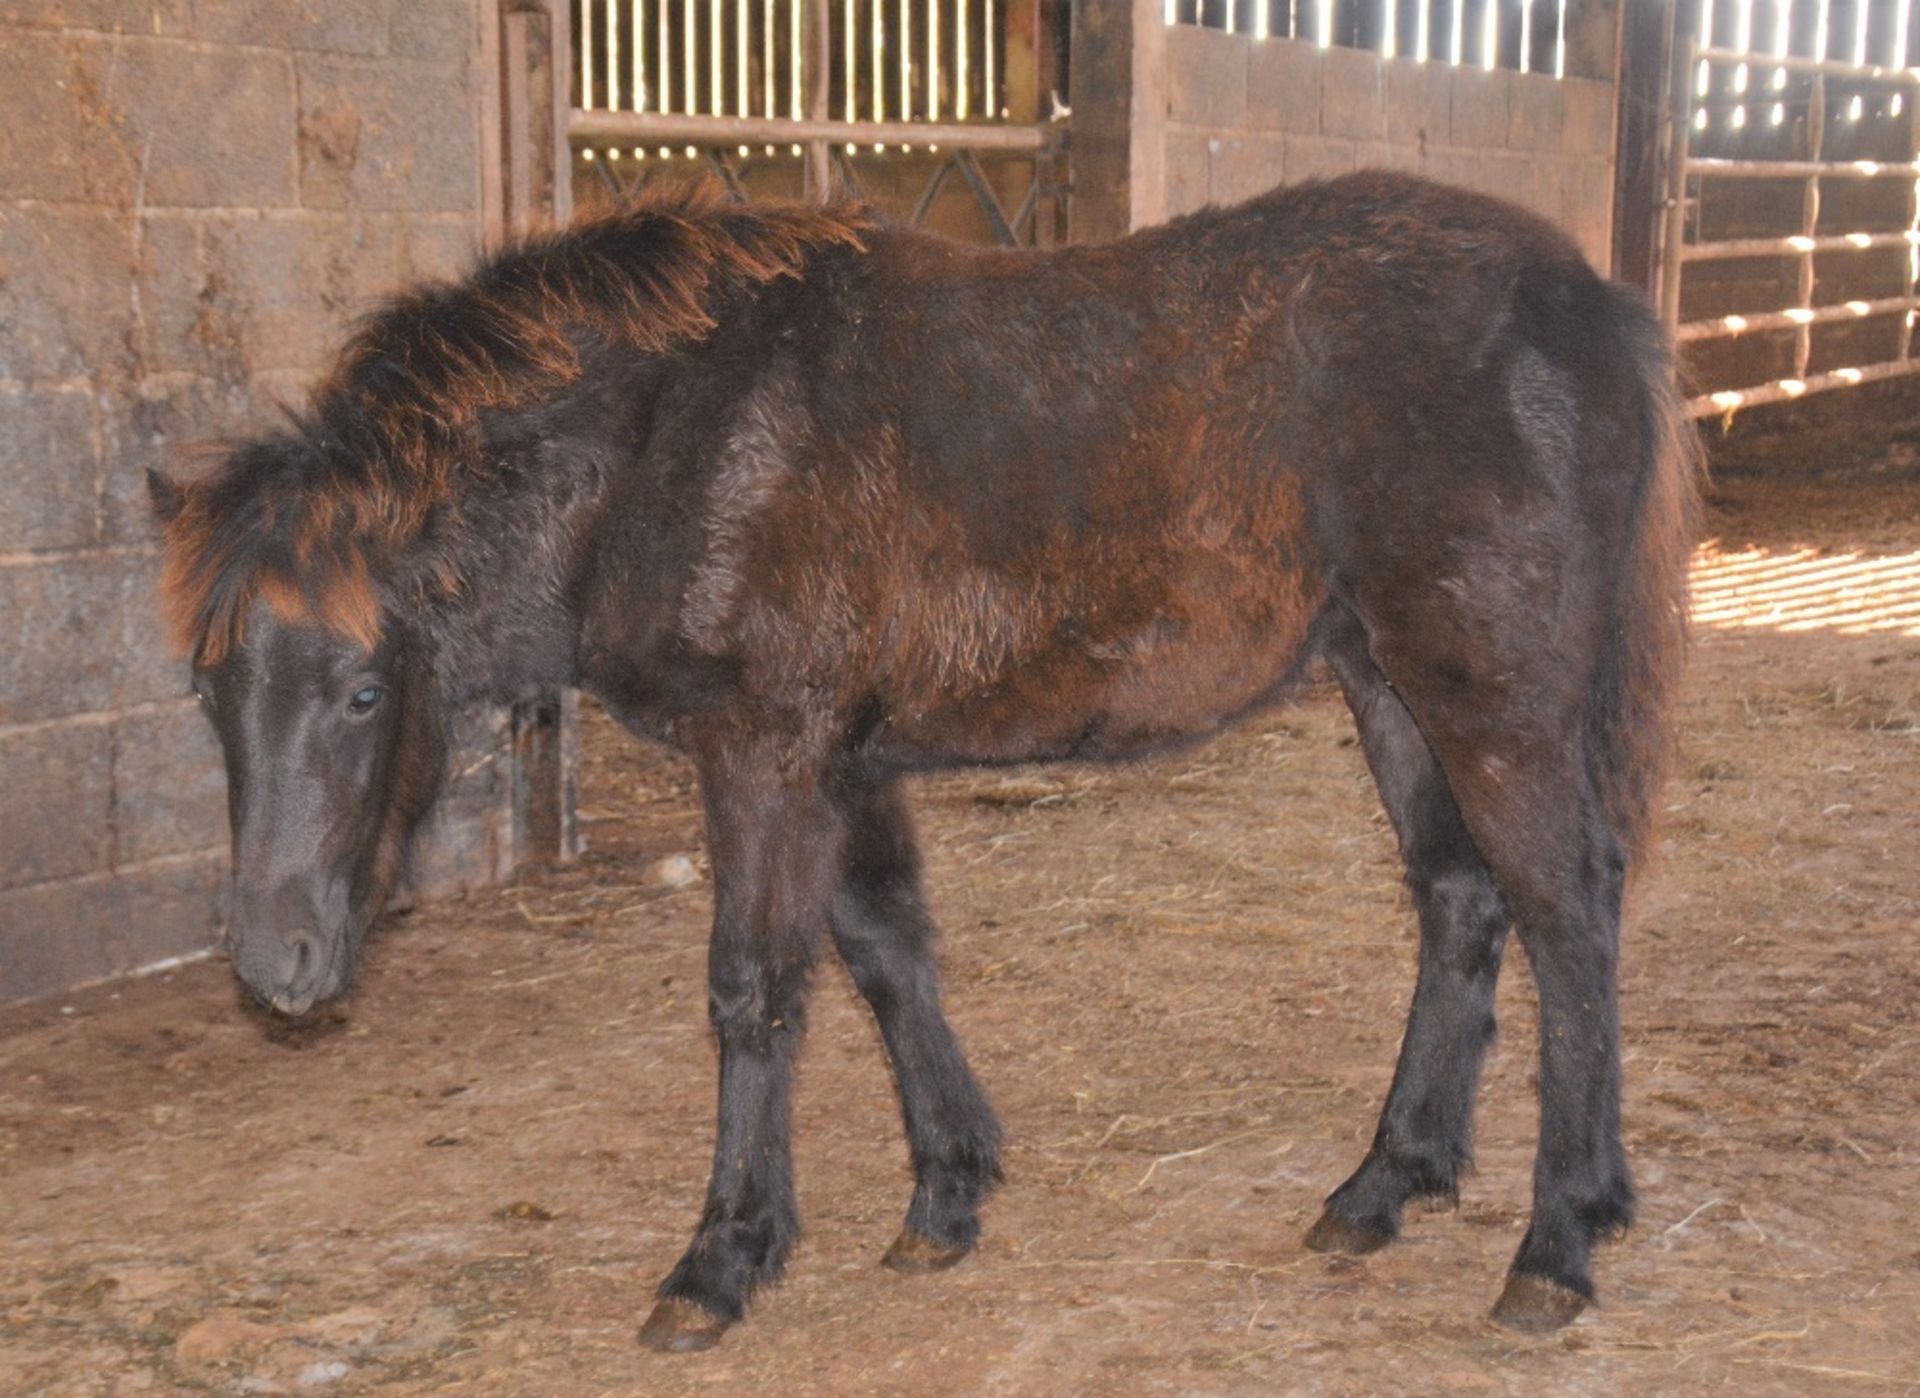 'BLACKATOR KEIRA' DARTMOOR HILL PONY DARK BAY FILLY APPROX 6 MONTHS OLD - Image 10 of 10